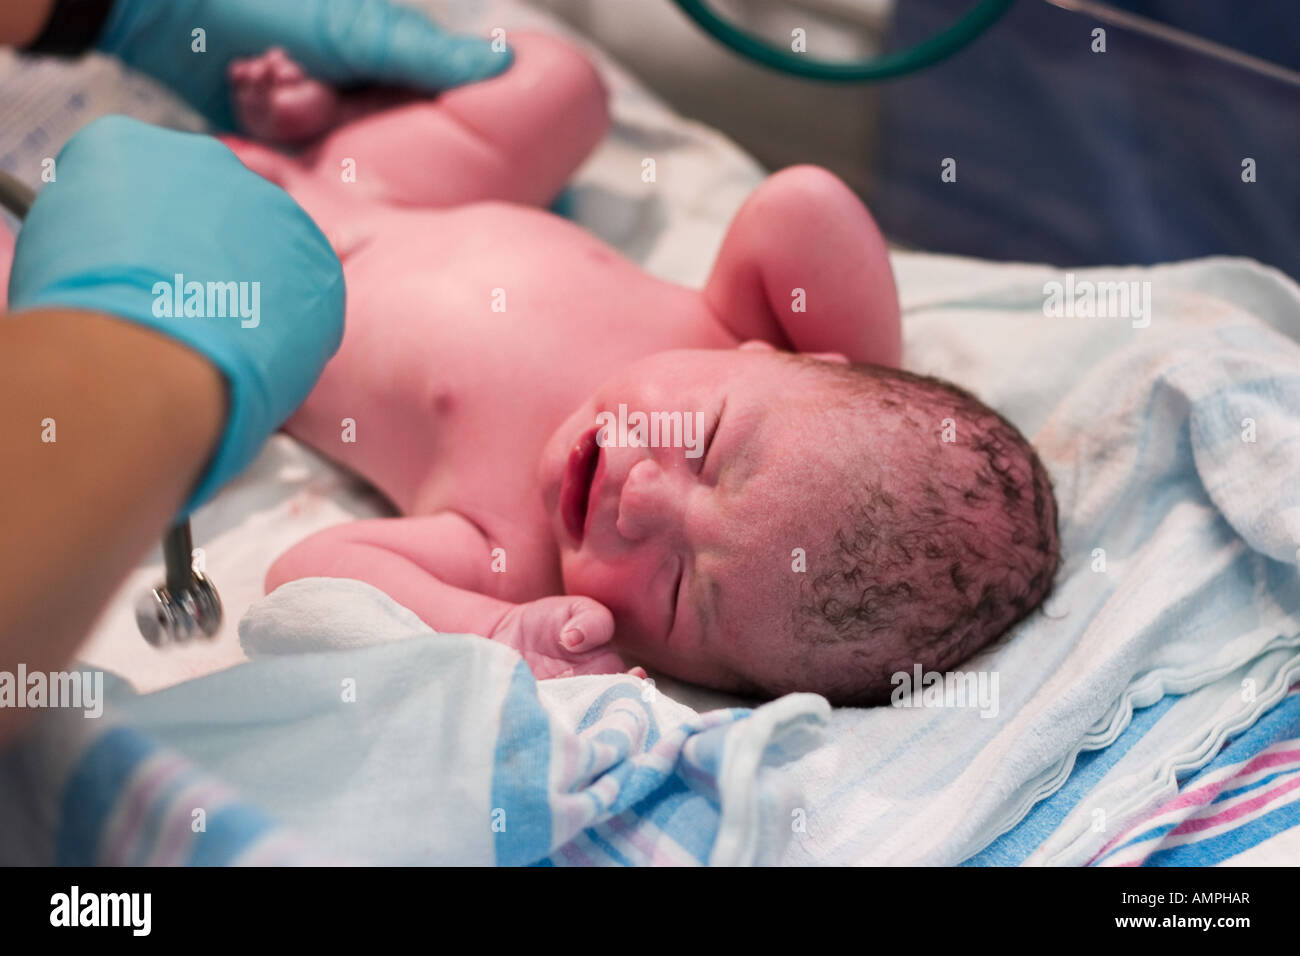 Newborn baby being examined in delivery room Stock Photo